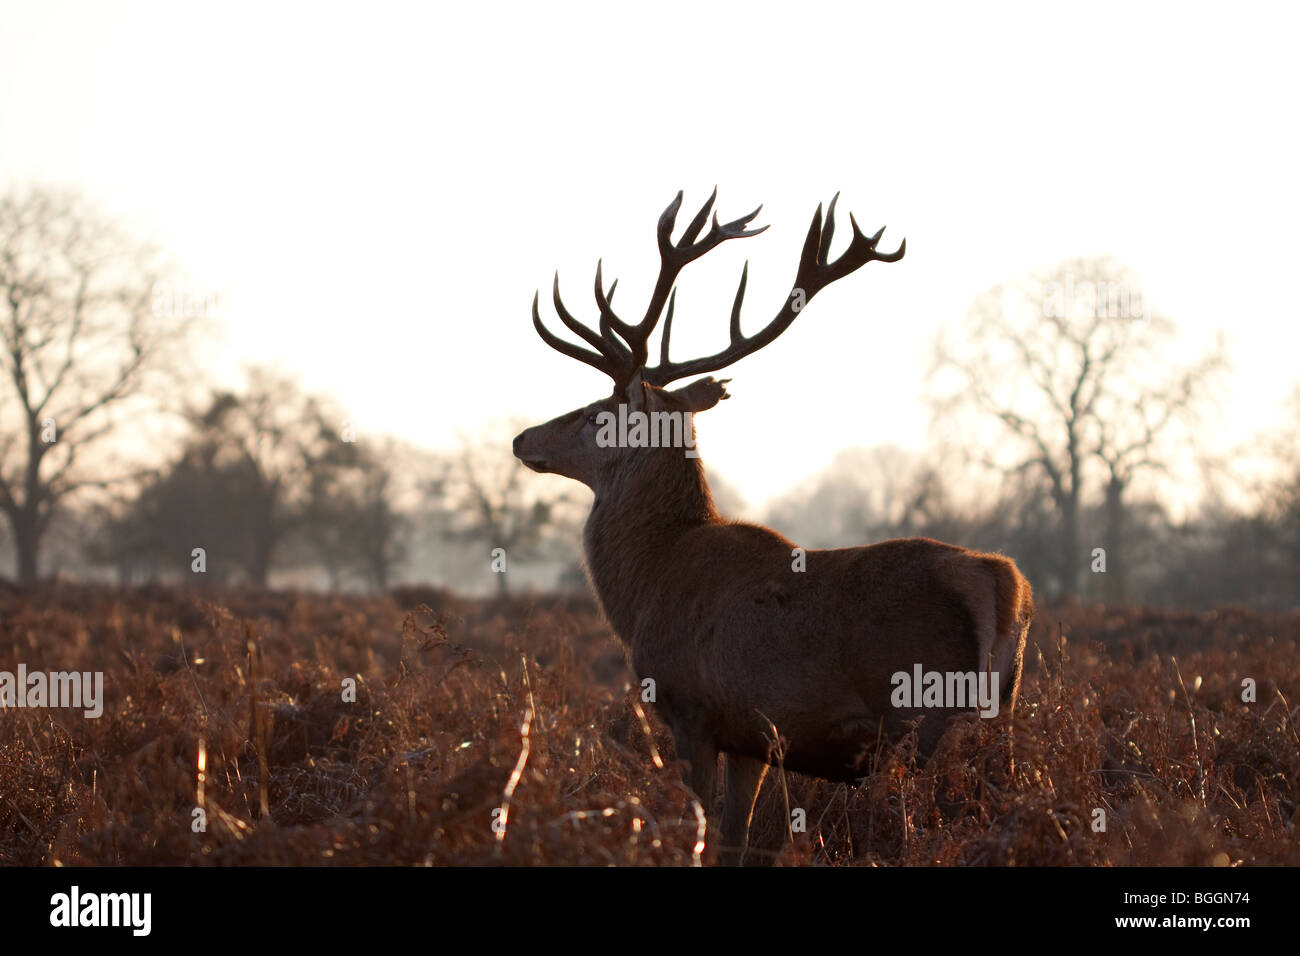 A Stag standing in some bracken. Stock Photo